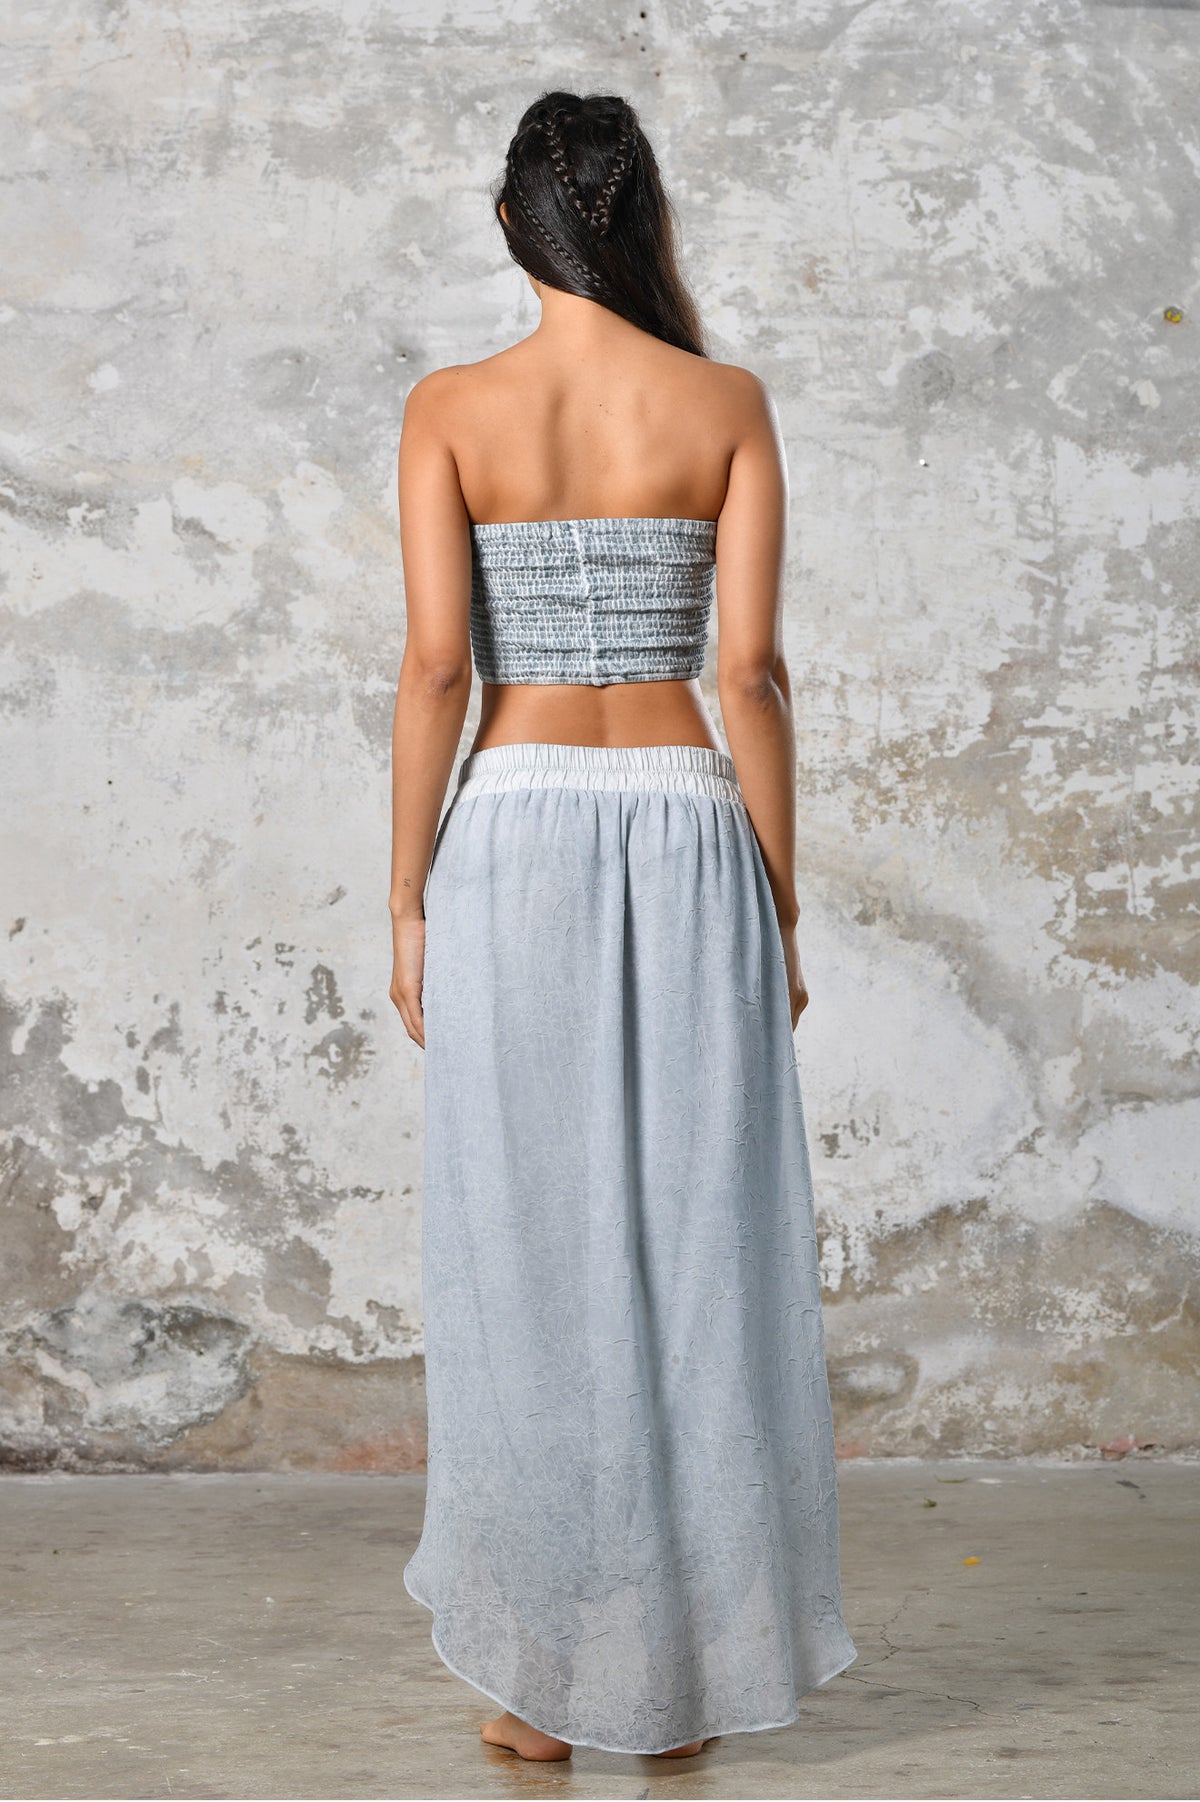 Step into timeless baby blue boho chic with our Boho high split skirt trousers. Crafted from organic materials, this sexy summer boho yoga pants , eco-conscious fashion for the modern goddess.